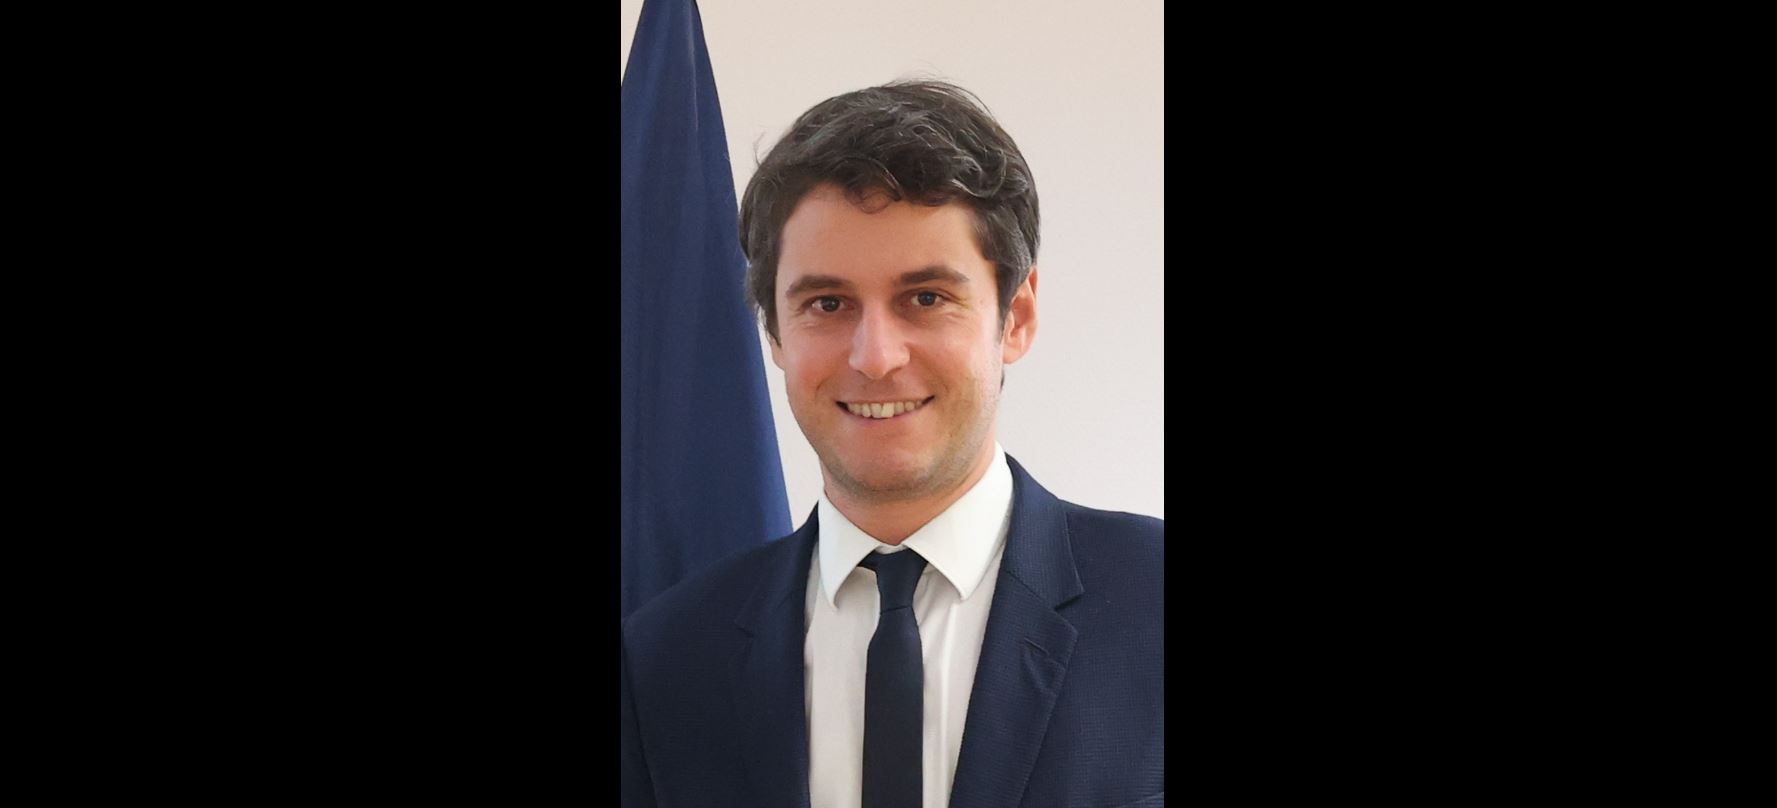 France gets its first gay prime minister with Gabriel Attal